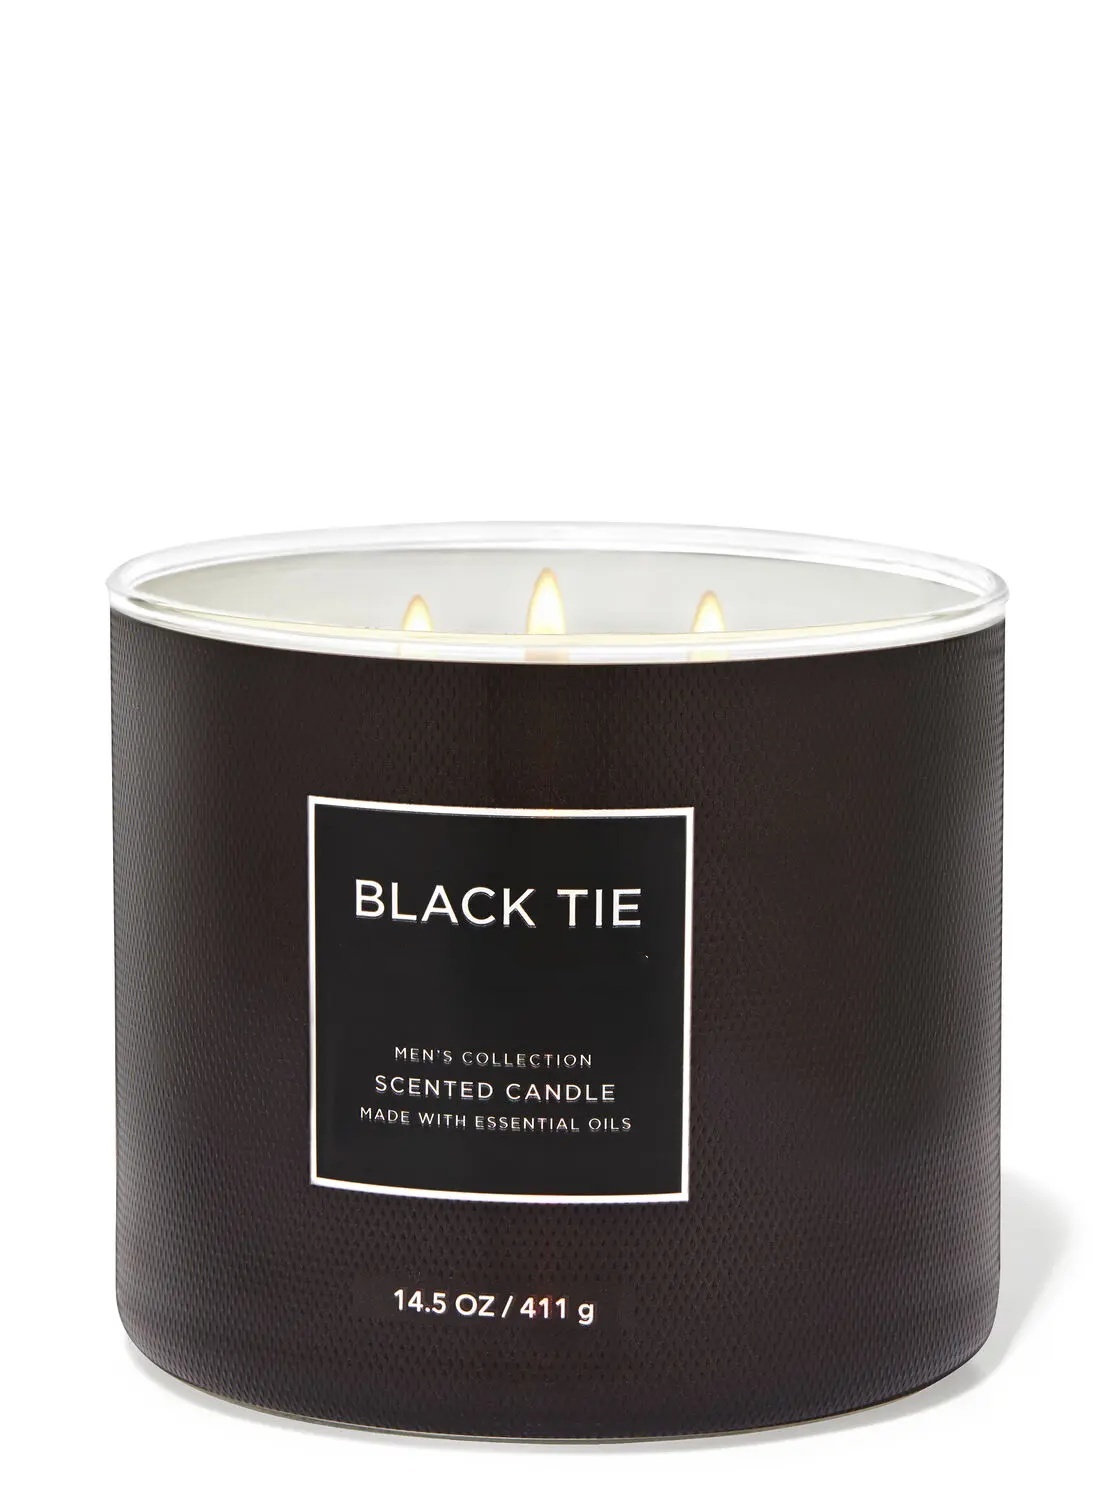 Black tie - scented candle